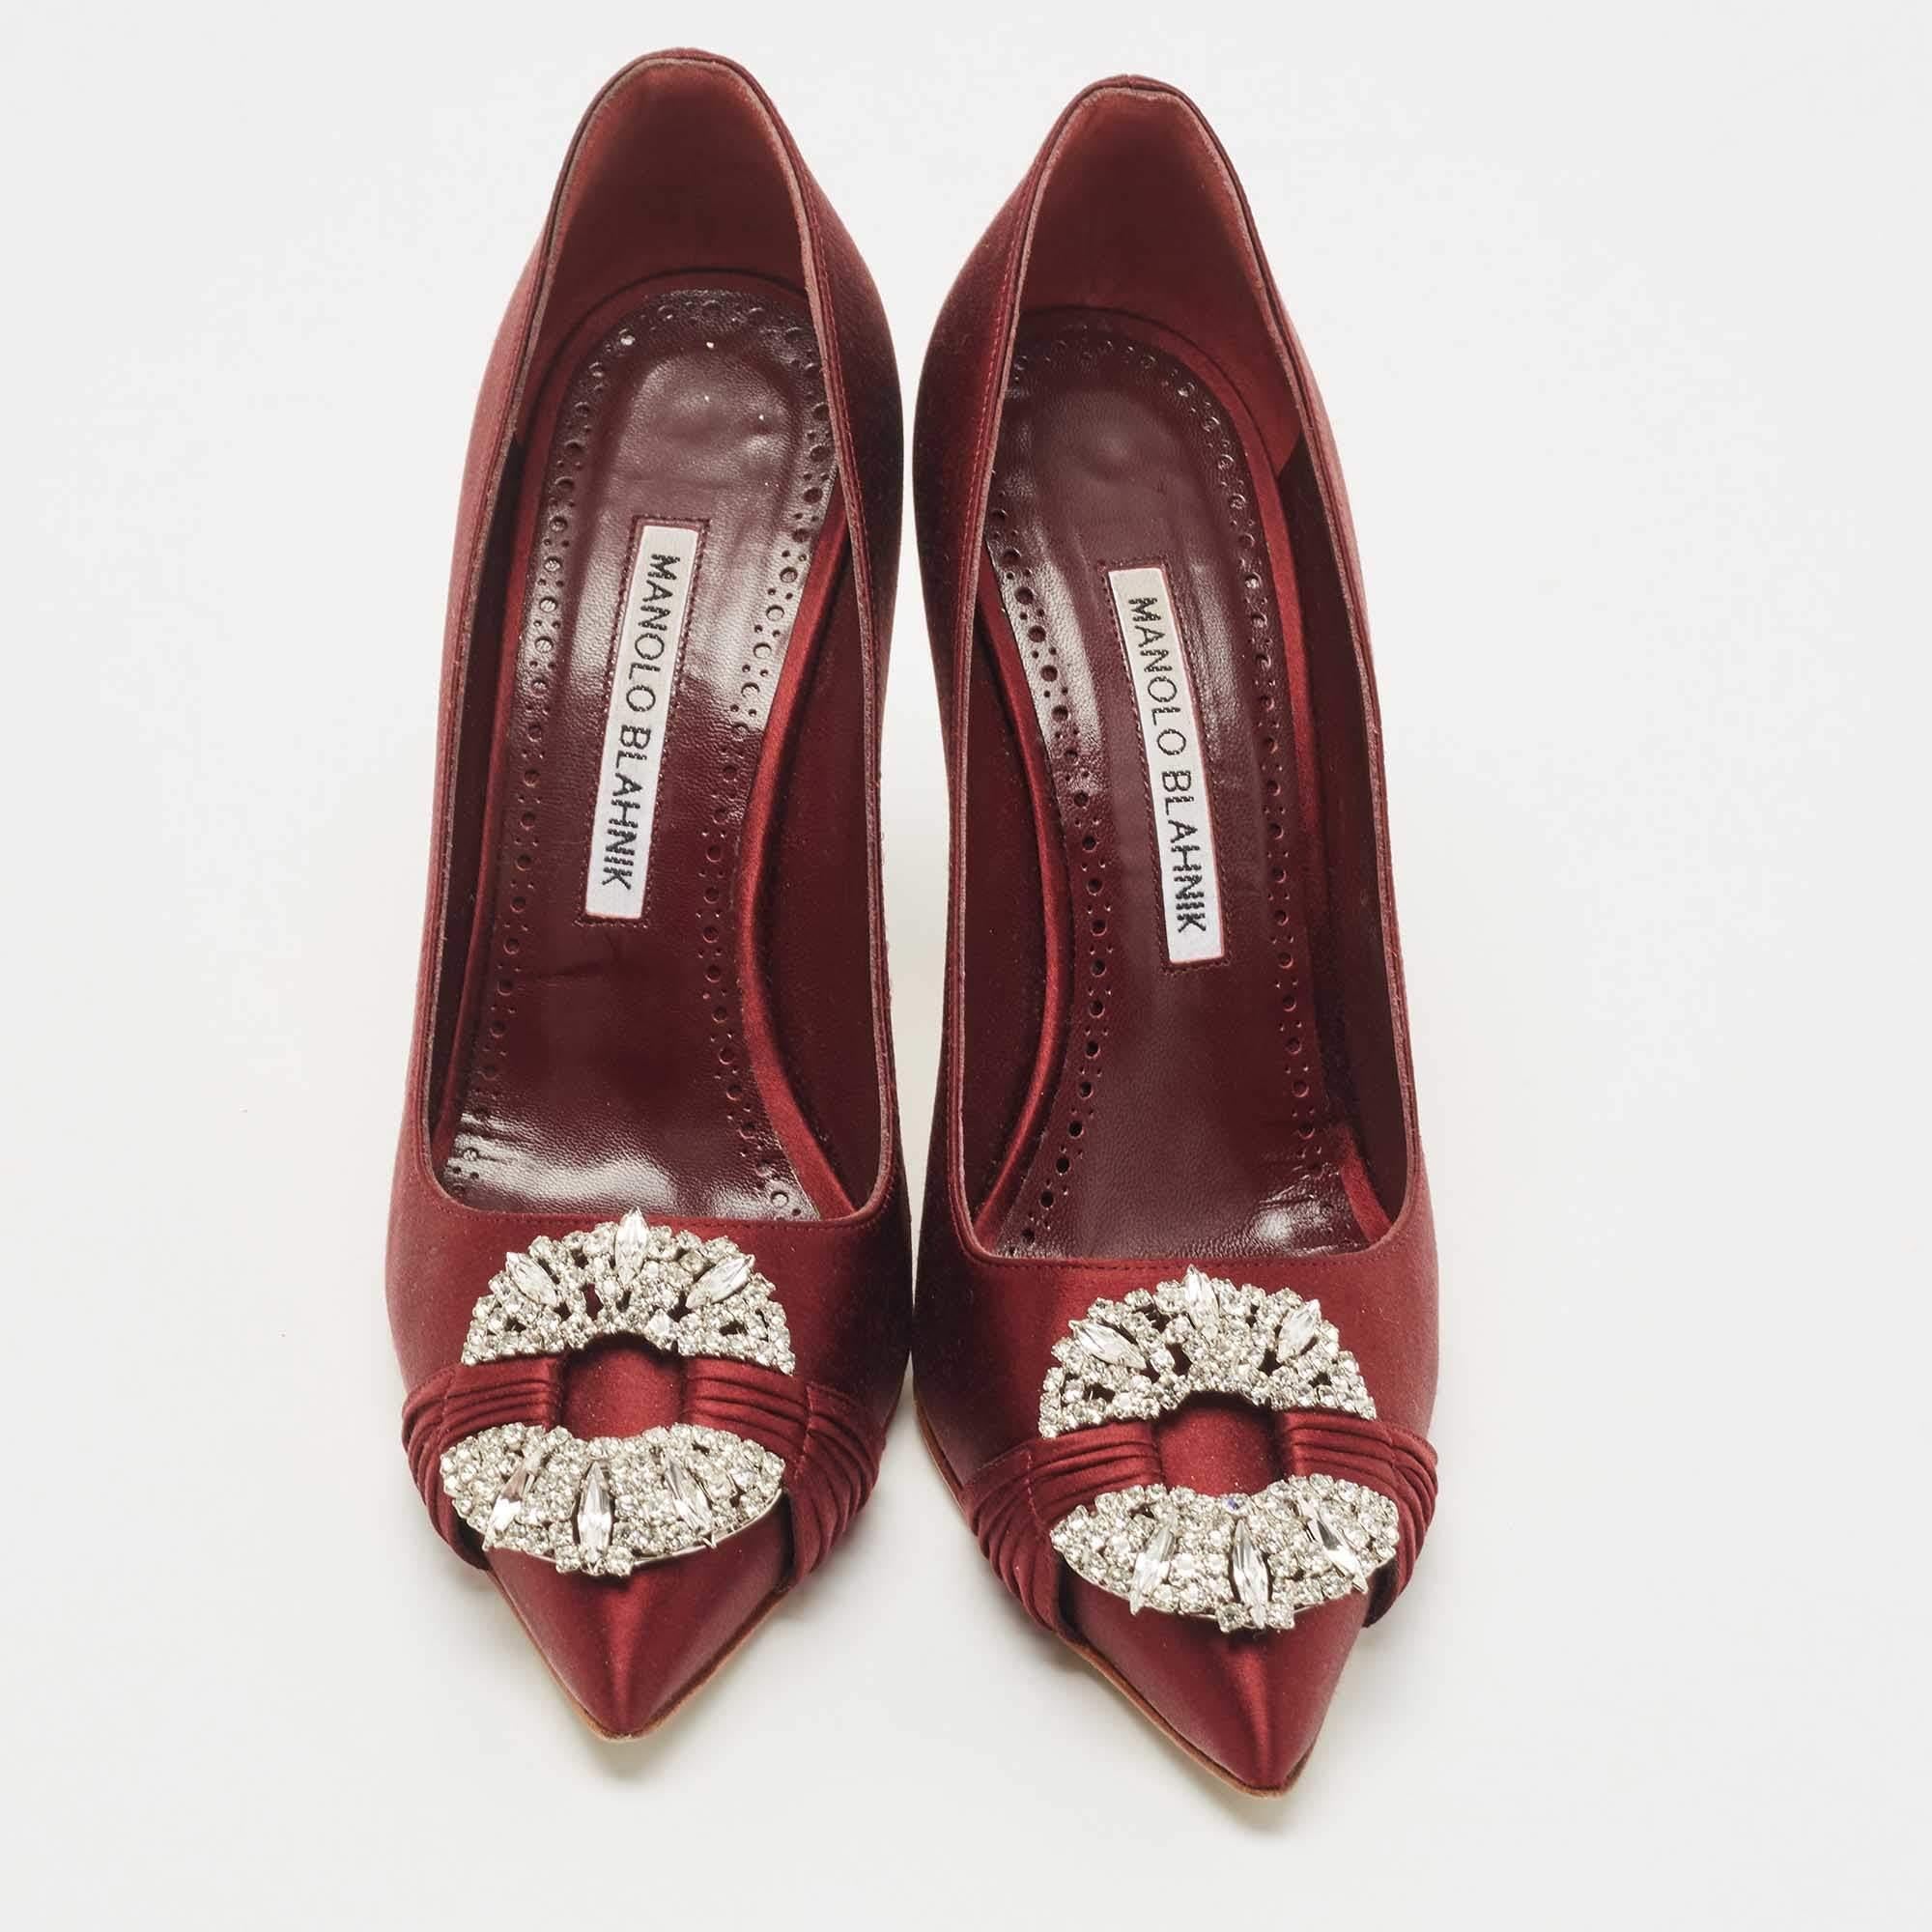 Perfectly sewn and finished to ensure an elegant look and fit, these Manolo Blahnik shoes are a purchase you'll love flaunting. They look great on the feet.

Includes
Original Dustbag, Original Box